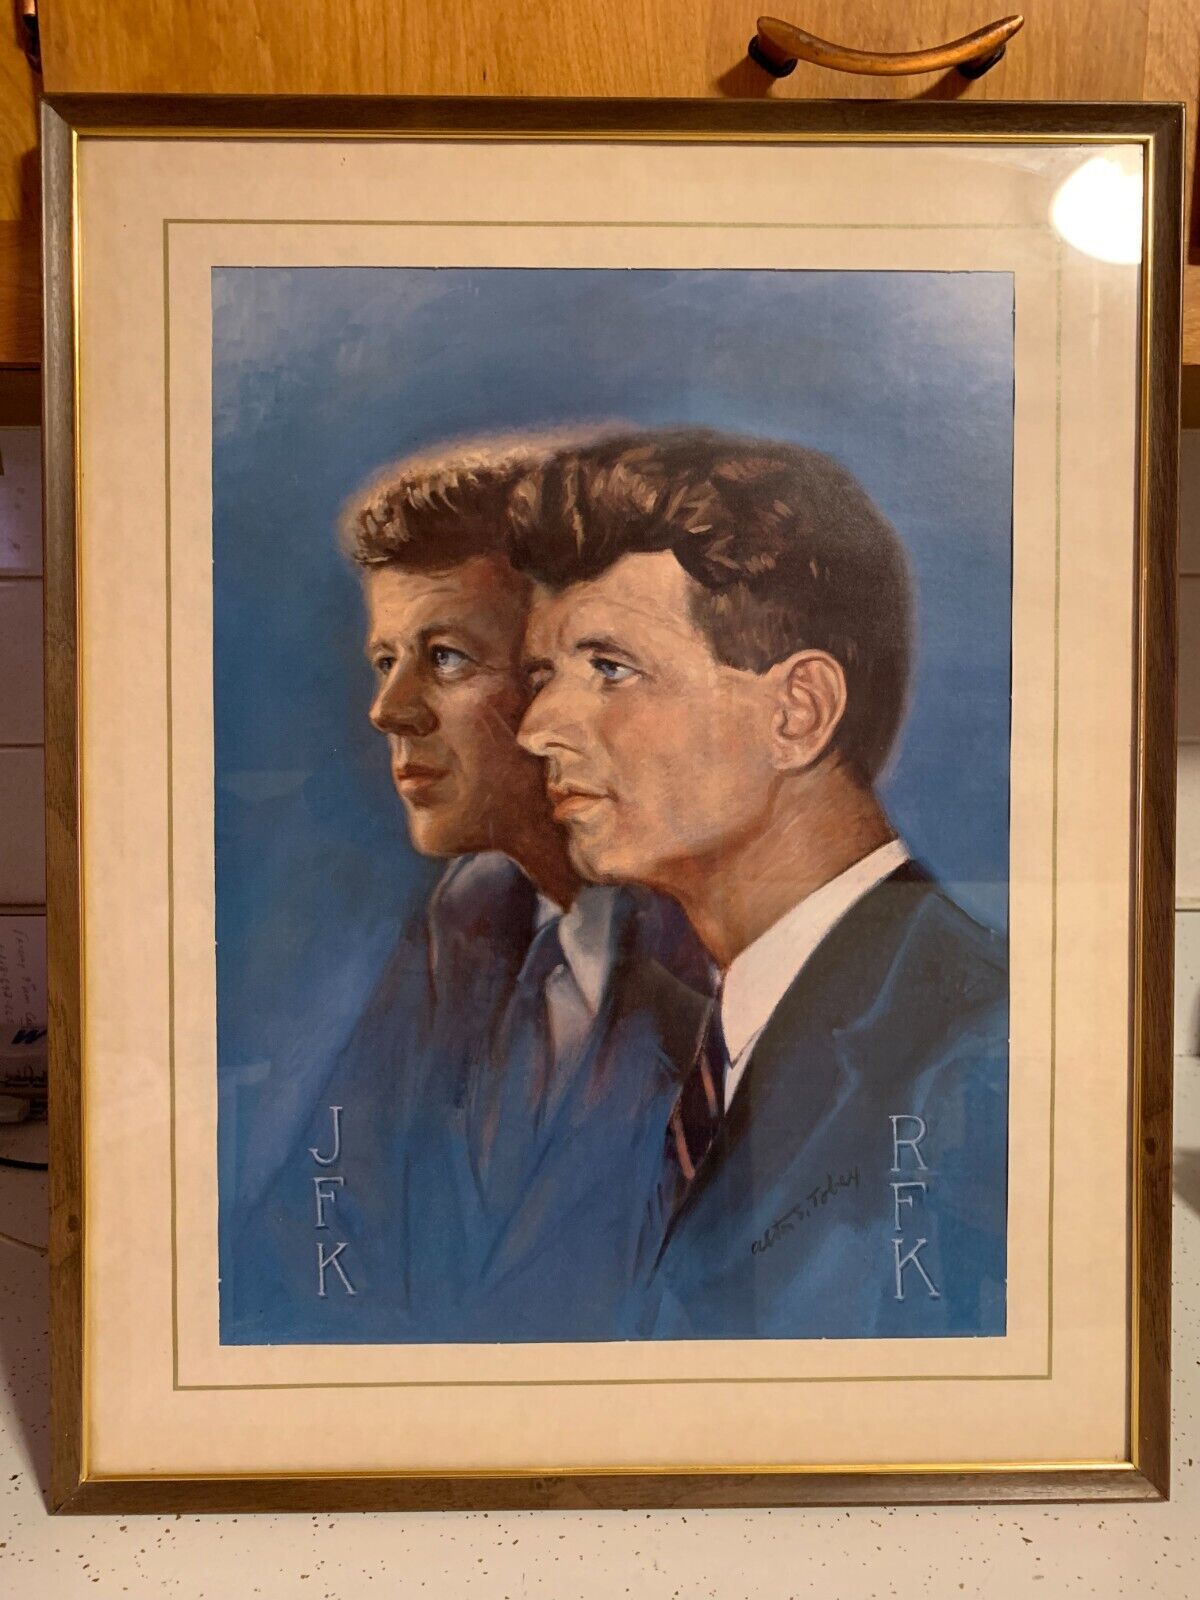 John F. and Robert Kennedy The Kennedy's Print by Alton Tobey in Frame